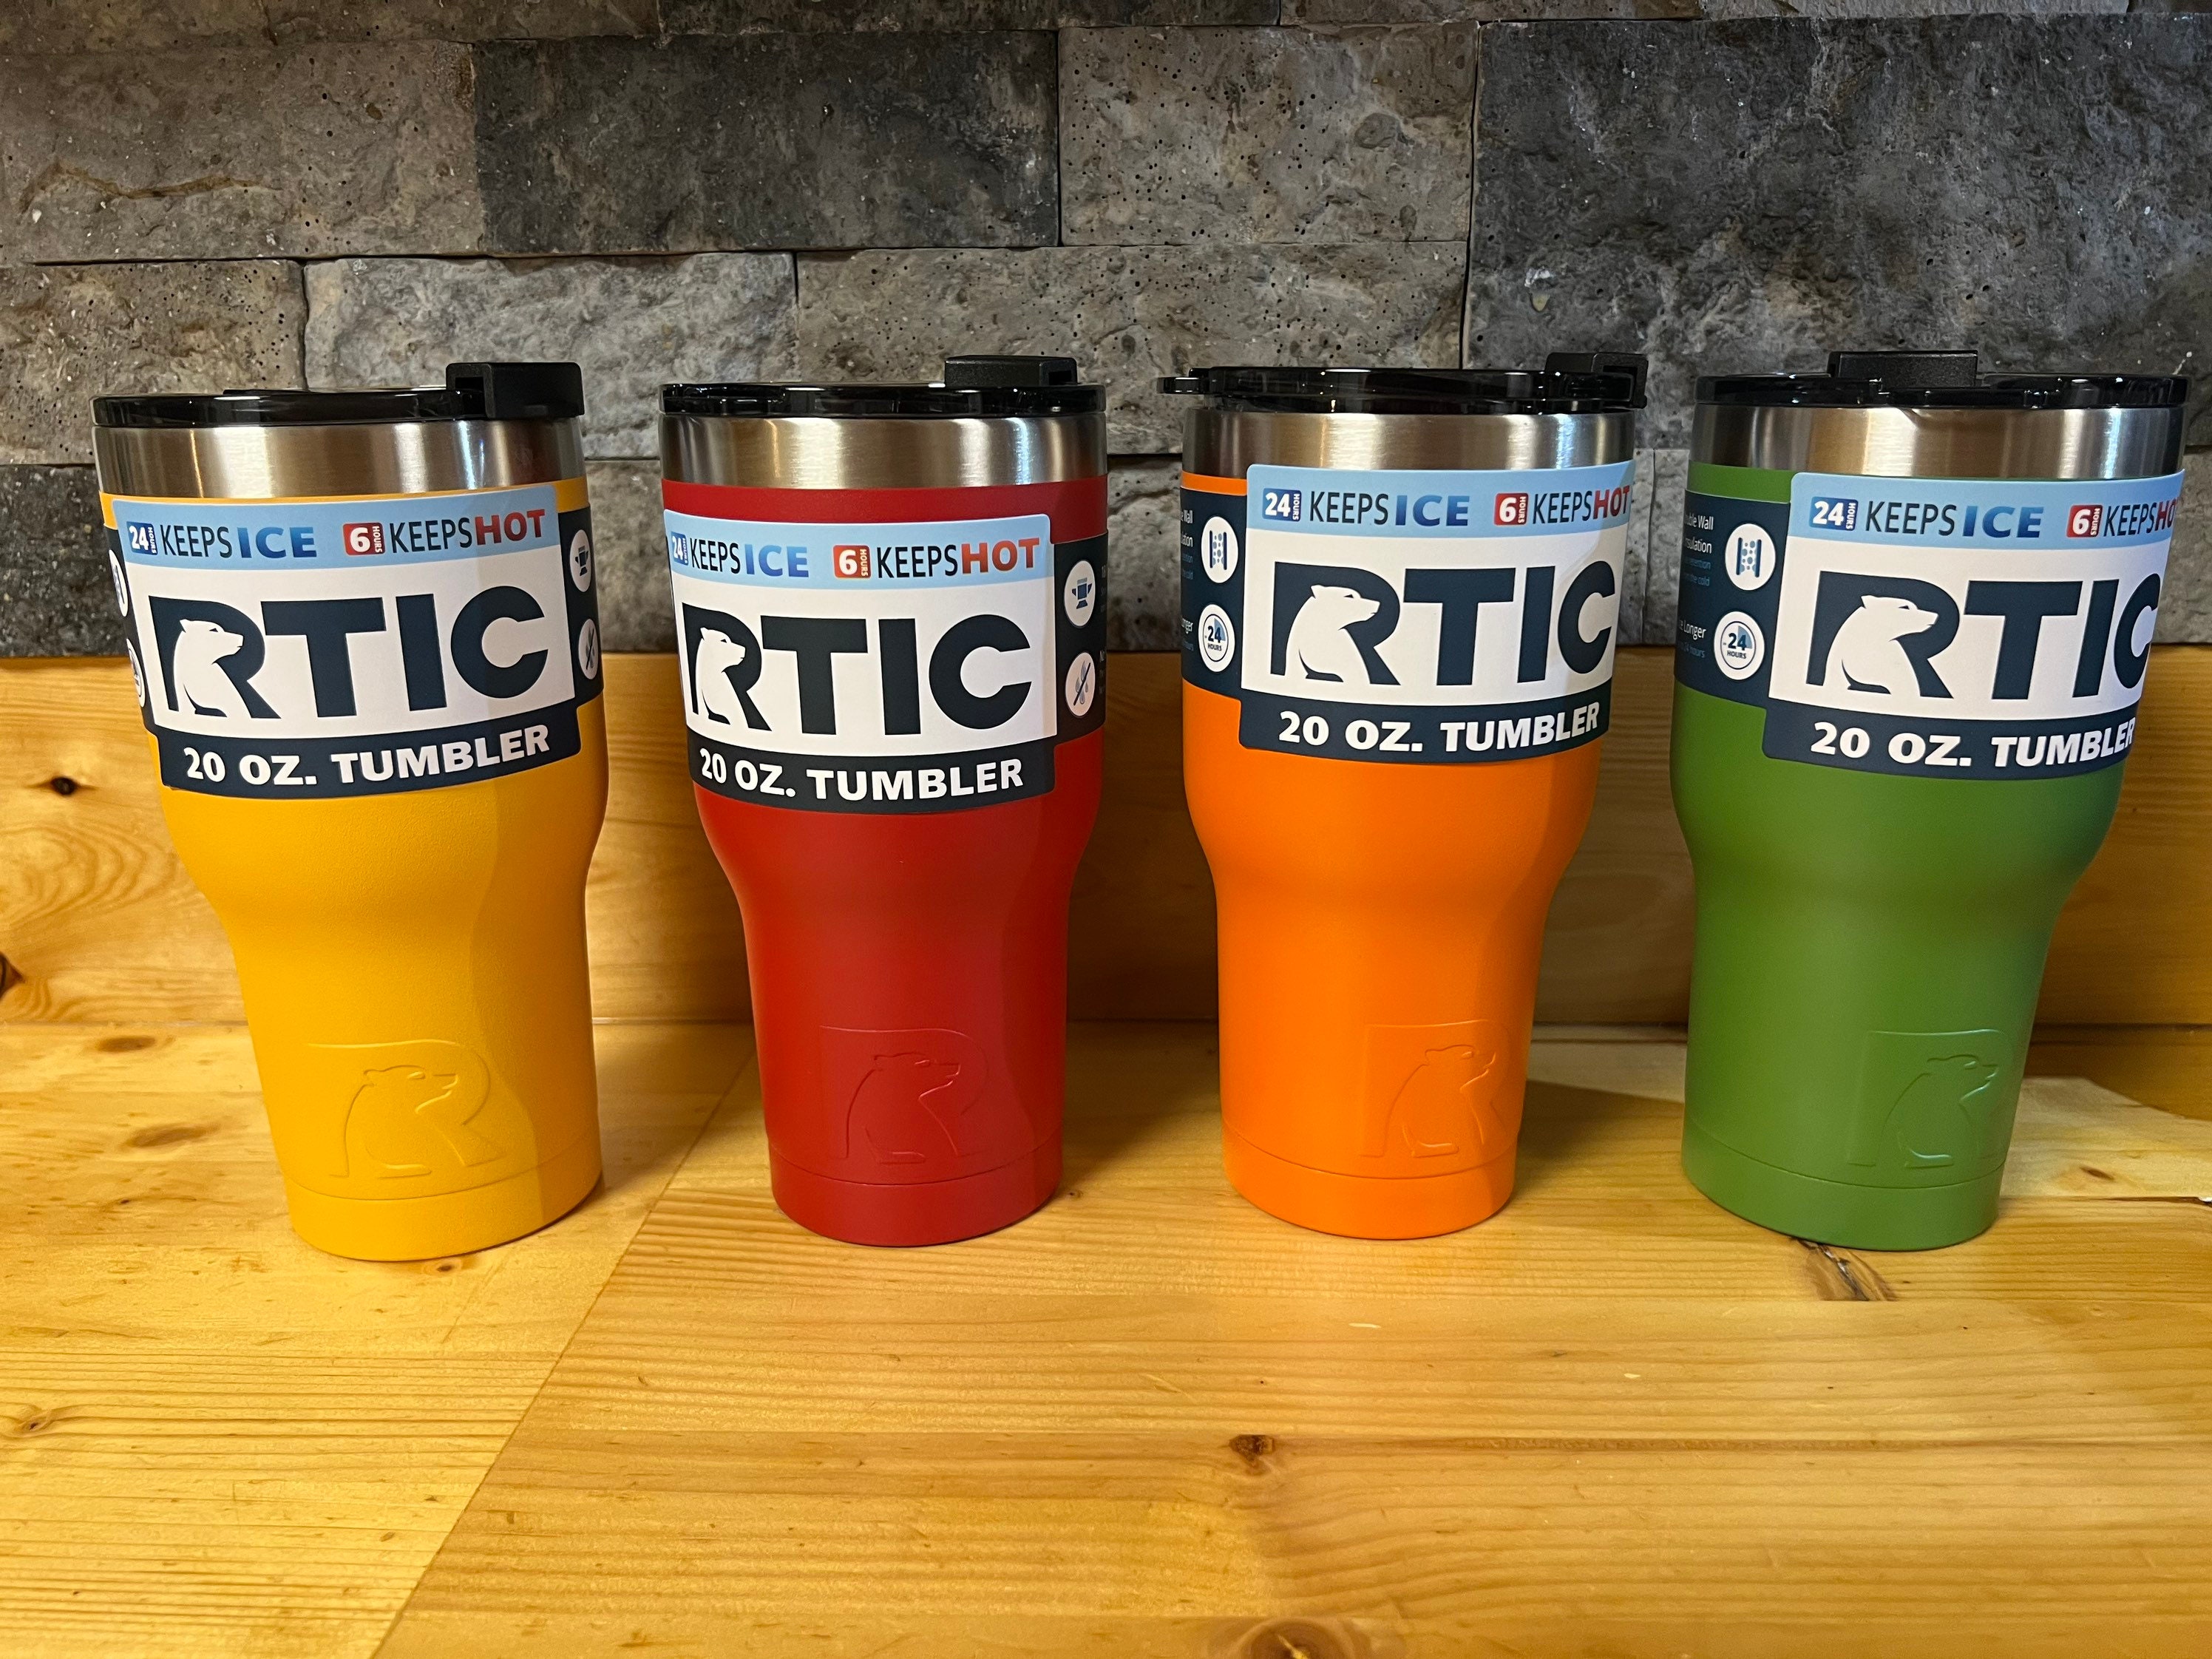 Personalized 20oz RTIC Tumbler - Laser Etched Designs - Insulated Stainless  Steel - Ideal Gift — R.J. Machine Company, Inc. 8 WEDGE forcible entry  tool, accountability tags & fire safety products